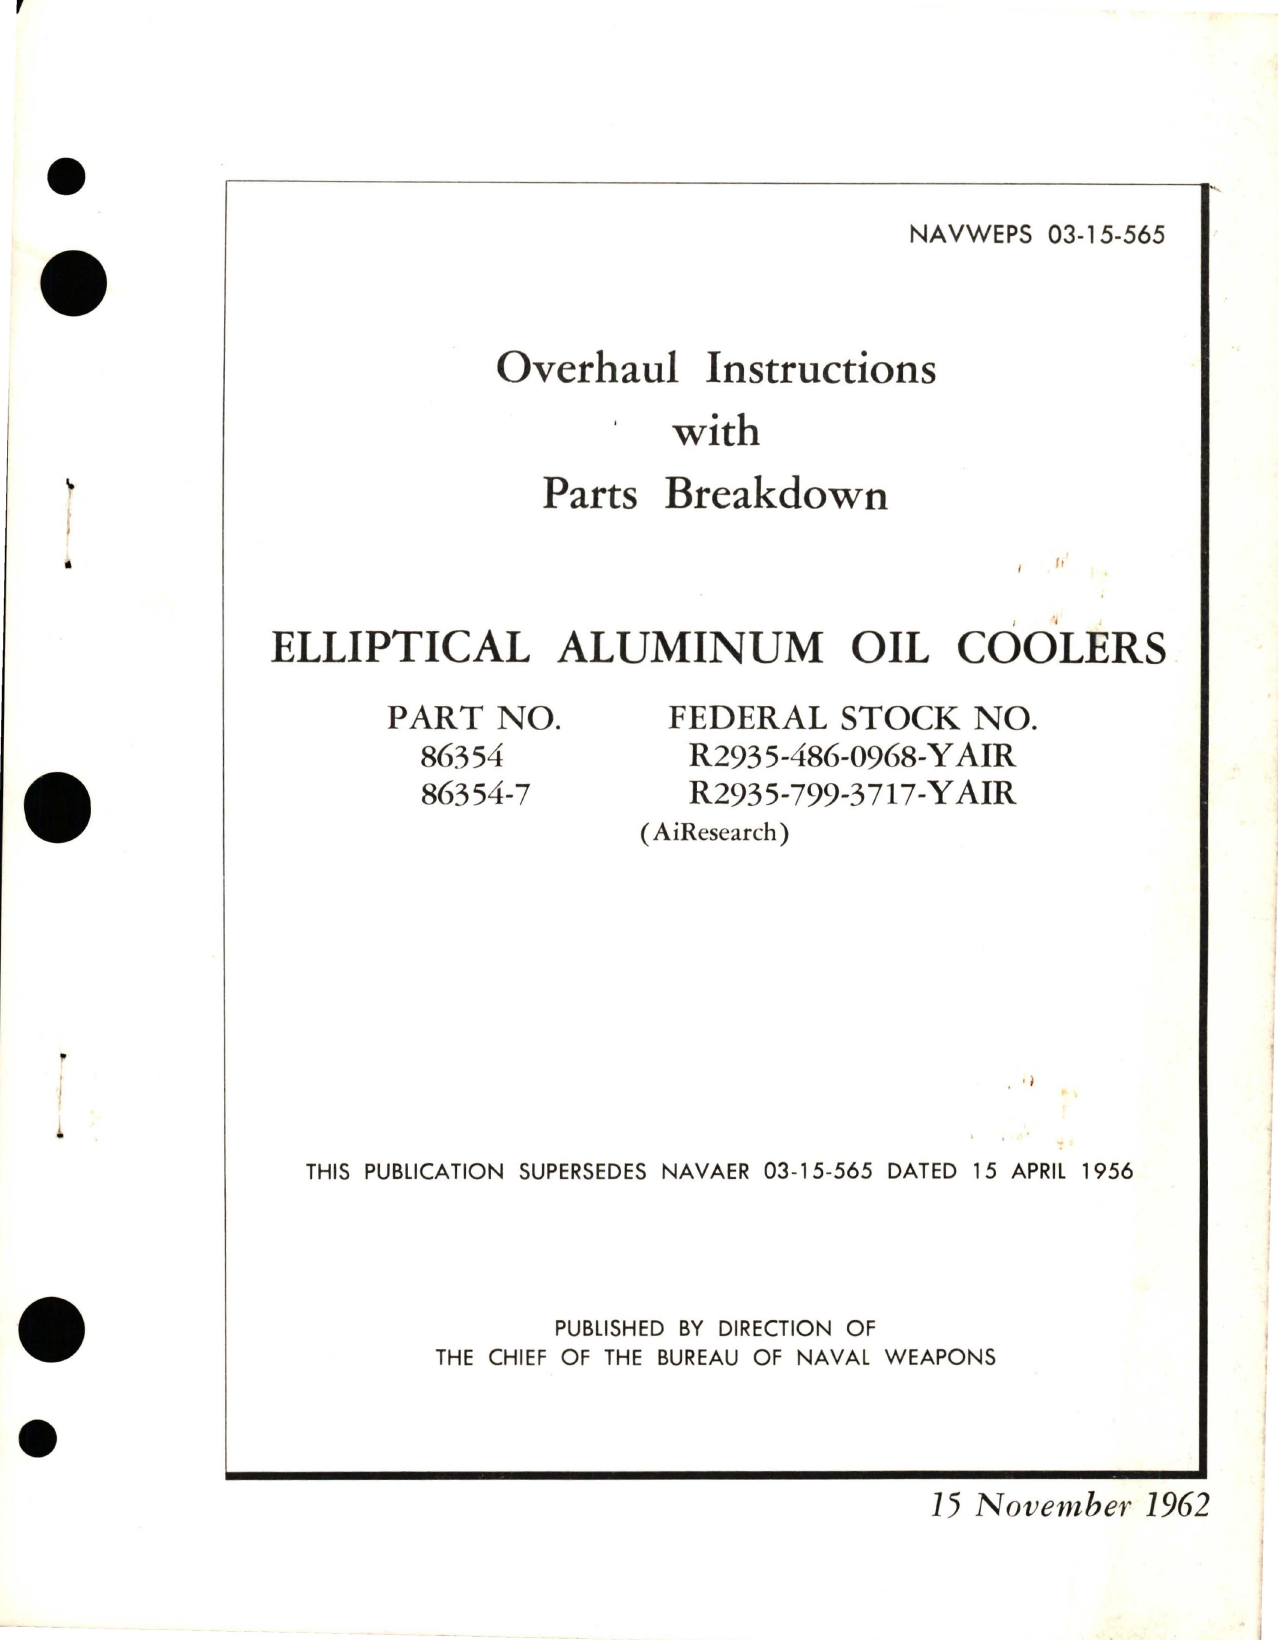 Sample page 1 from AirCorps Library document: Overhaul Instructions Parts Breakdown for Elliptical Aluminum Oil Coolers - Parts 86354 and 96354-7 